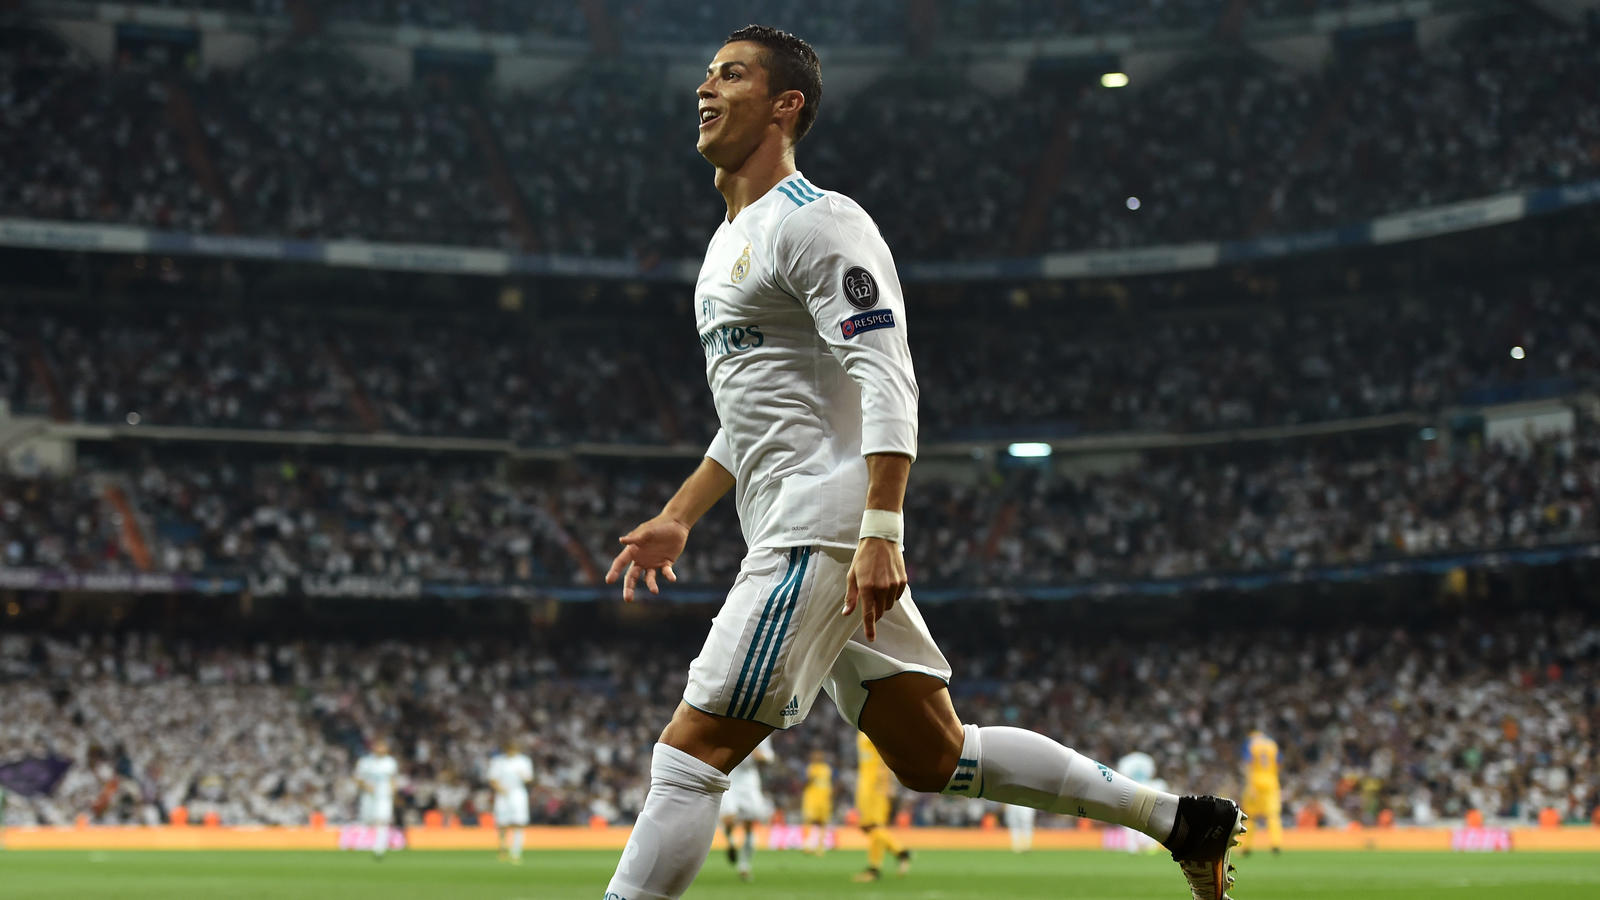 MADRID, SPAIN - SEPTEMBER 13: Cristiano Ronaldo of Real Madrid celebrates scoring his sides first goal during the UEFA Champions League group H match between Real Madrid and APOEL Nikosia at Estadio Santiago Bernabeu on September 13, 2017 in Madrid, 